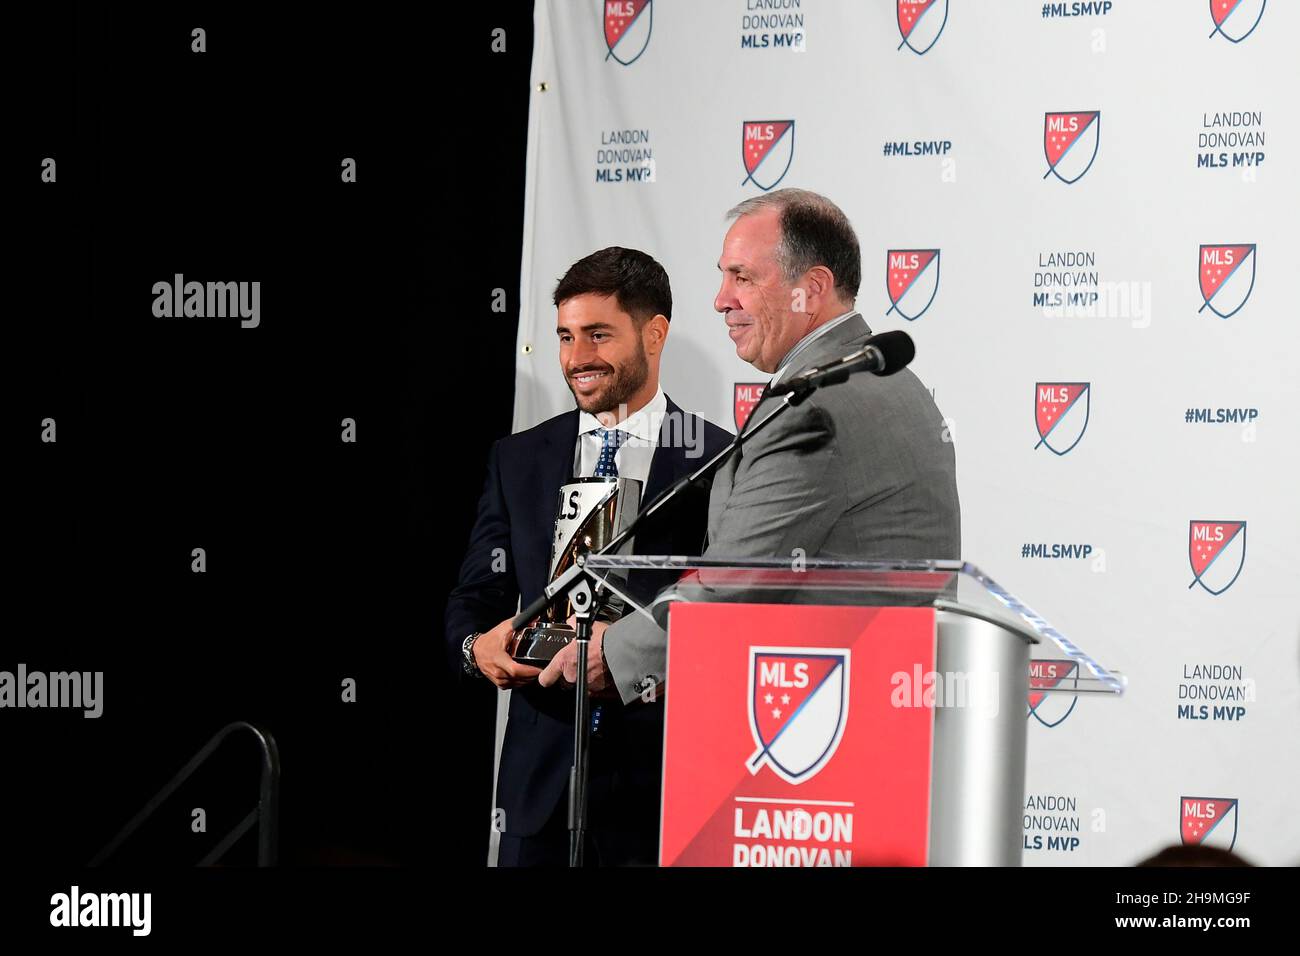 Foxborough Massachusetts, USA. 7th Dec, 2021. New England Revolution head coach Bruce Arena hands the 2021 Landon Donovan MLS Most Valuable Player award to New England Revolution midfielder Carles Gil at a ceremony held at Gillette Stadium in Foxborough Massachusetts. Eric Canha/CSM/Alamy Live News Stock Photo